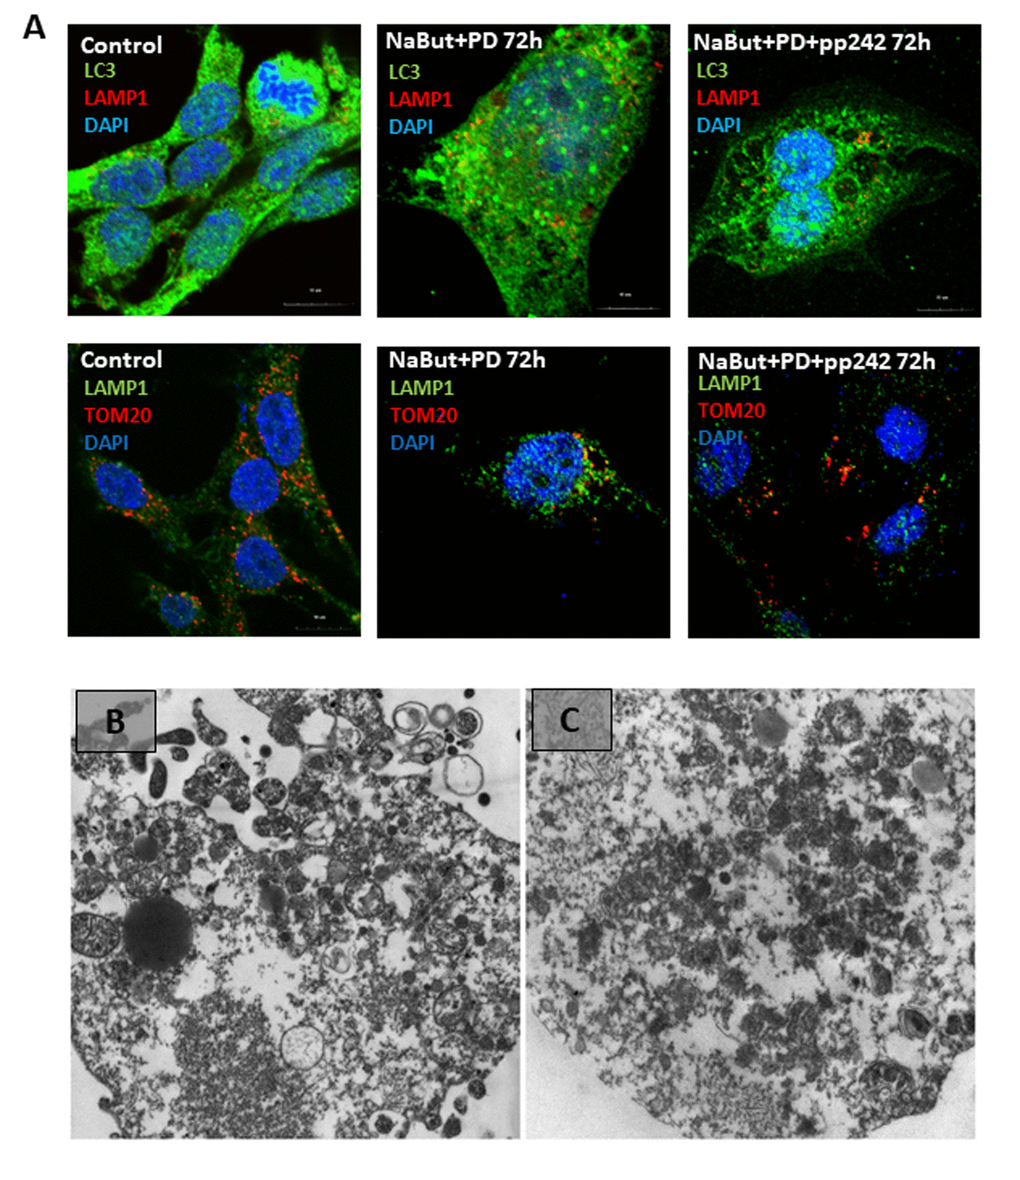 Senescent cells require active MEK/ERK pathway to implement degradation of the damaged mitochondria through their segregation into the LC3-negative vacuoles. (A) Cells exposed to MEK/ERK inhibitor do not segregate of lysosomes in the LC3-negative vacuoles (upper panel). IF images after staining with antibodies against LC3 and LAMP1) or mitochondria (bottom panel), IF images after staining with antibodies against TOM20 and LAMP1) of the LC3-negative vacuoles. (B) TEM of a senescent cell after MEK/ERK suppression undergoing complete destruction of the cytoplasm without segregation and elimination of the damaged mitochondria. (C) TEM image of senescent cells exposed to pp242 + PD0325901 showing destruction of the cytoplasm and dispersed damaged mitochondria. Scale bars: 1 µm.